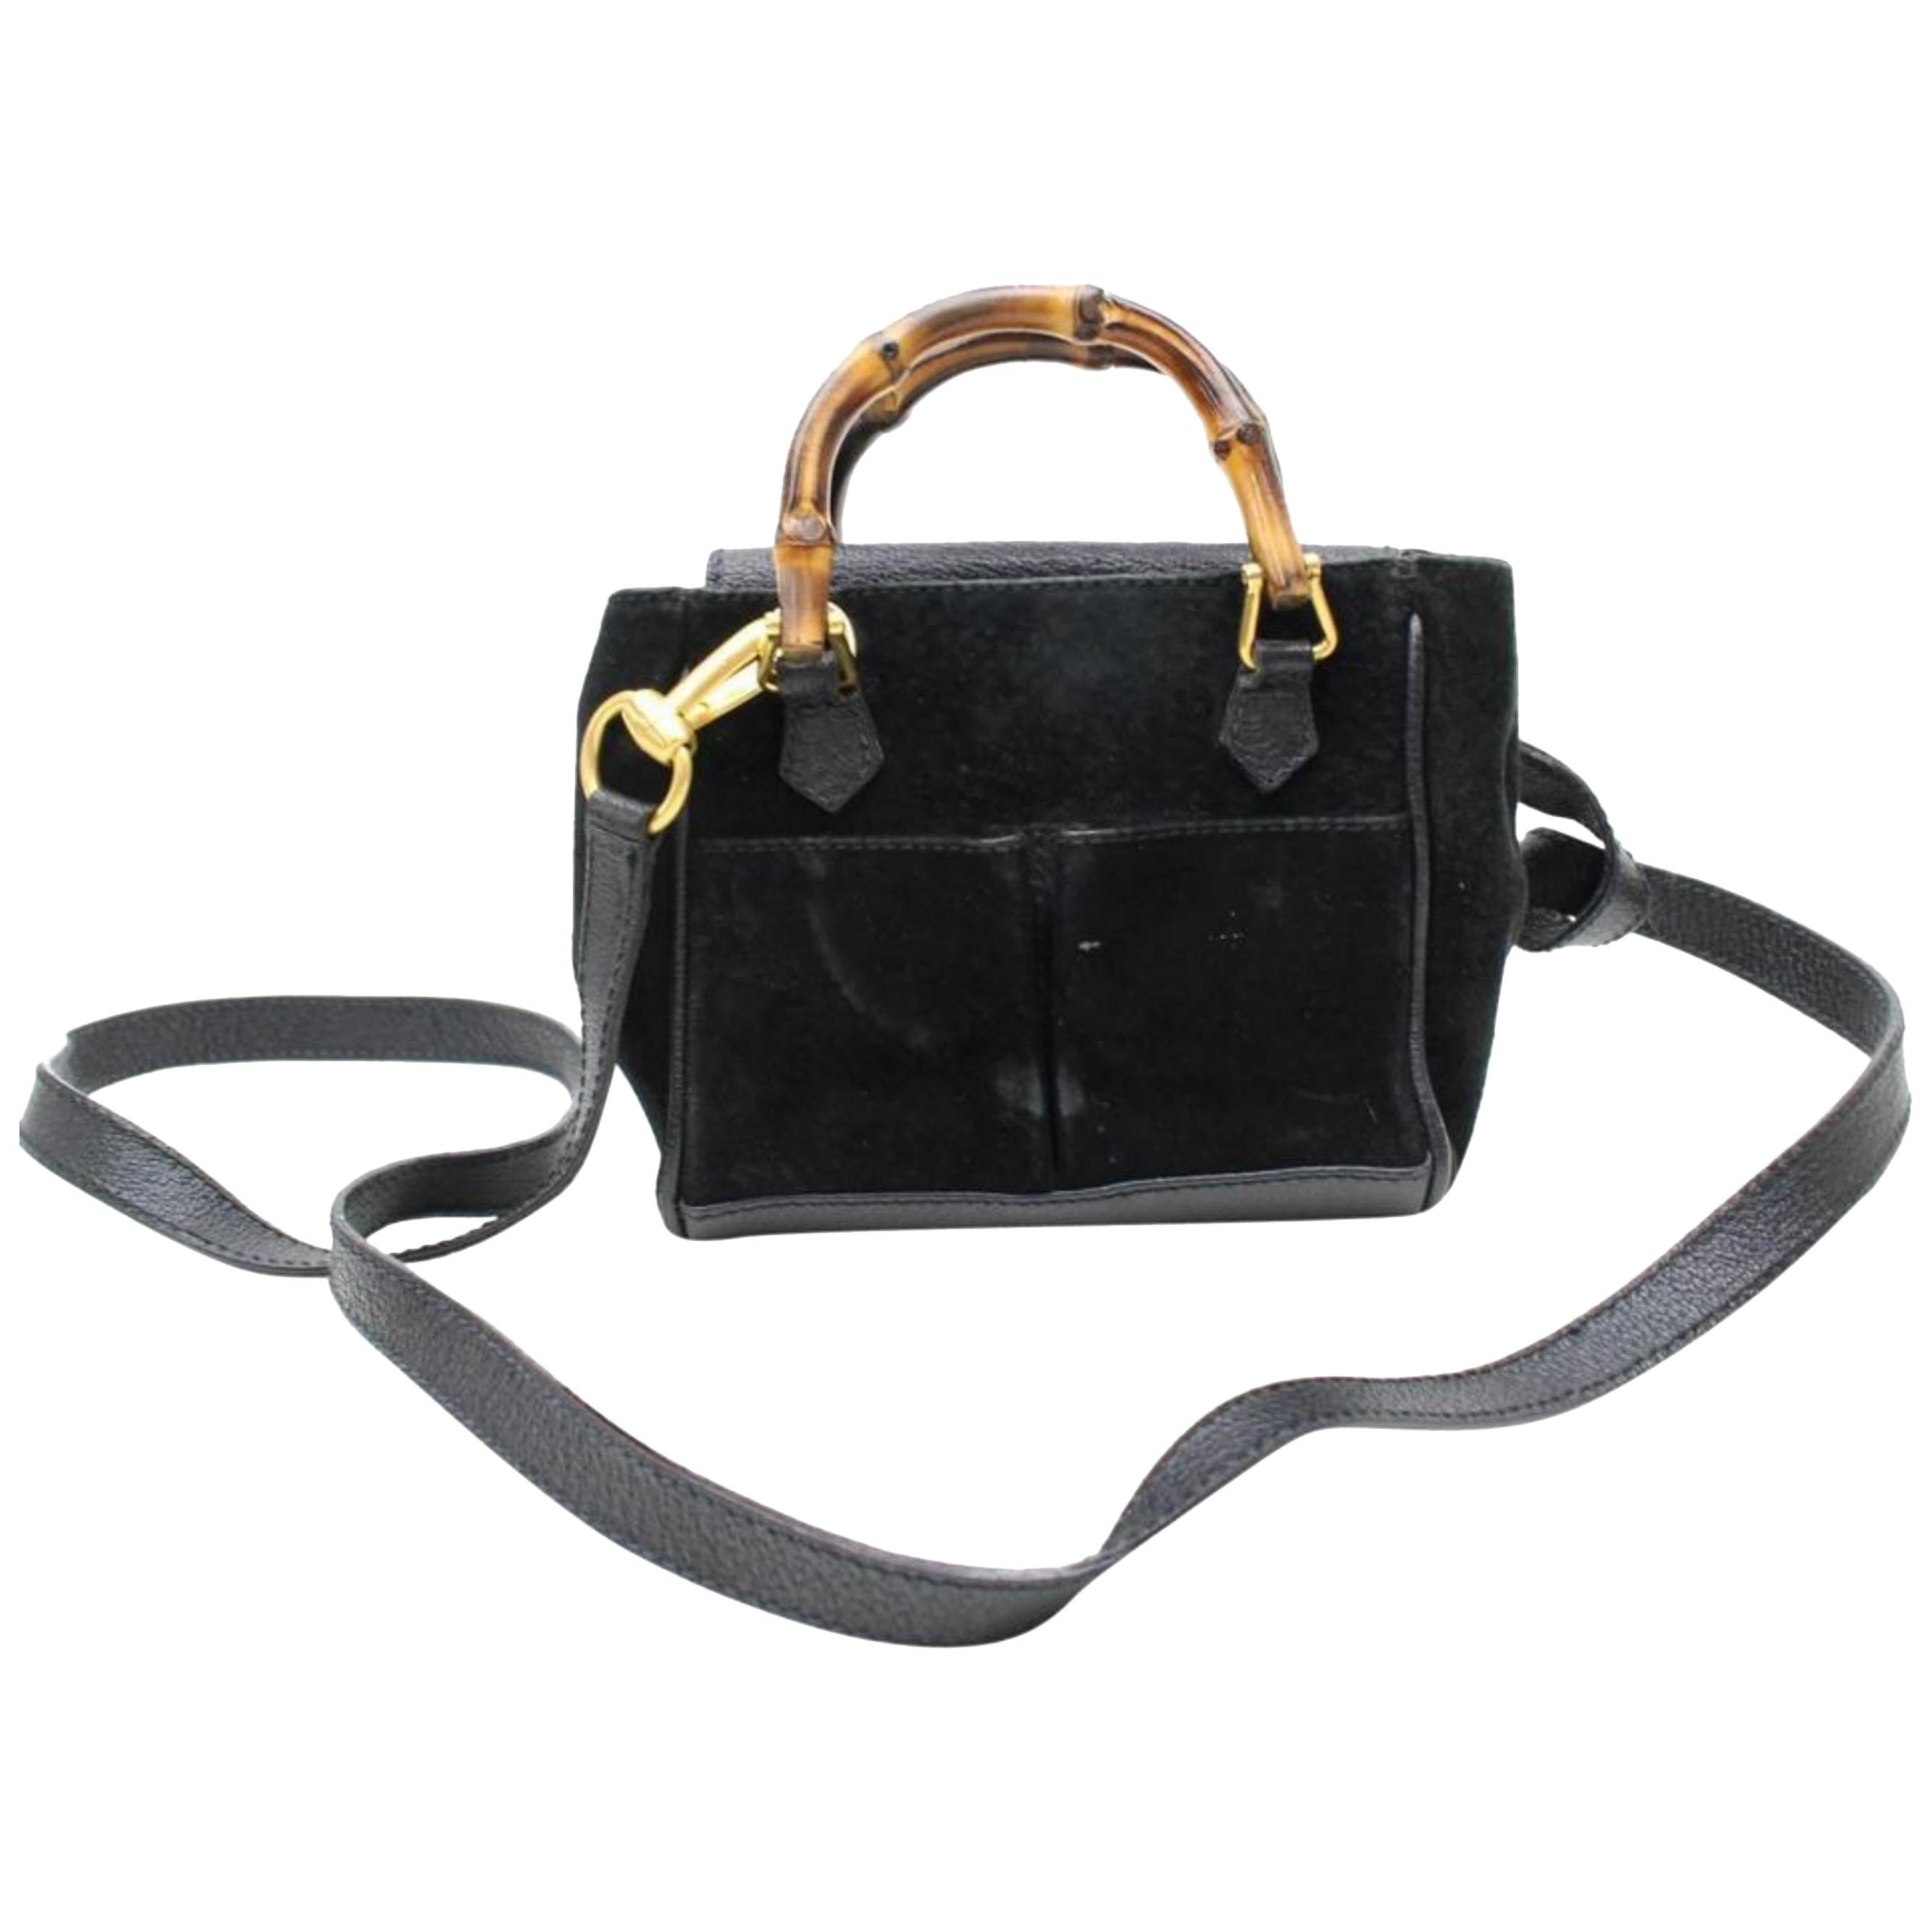 Gucci Bamboo 2way 867617 Black Suede Leather Shoulder Bag For Sale